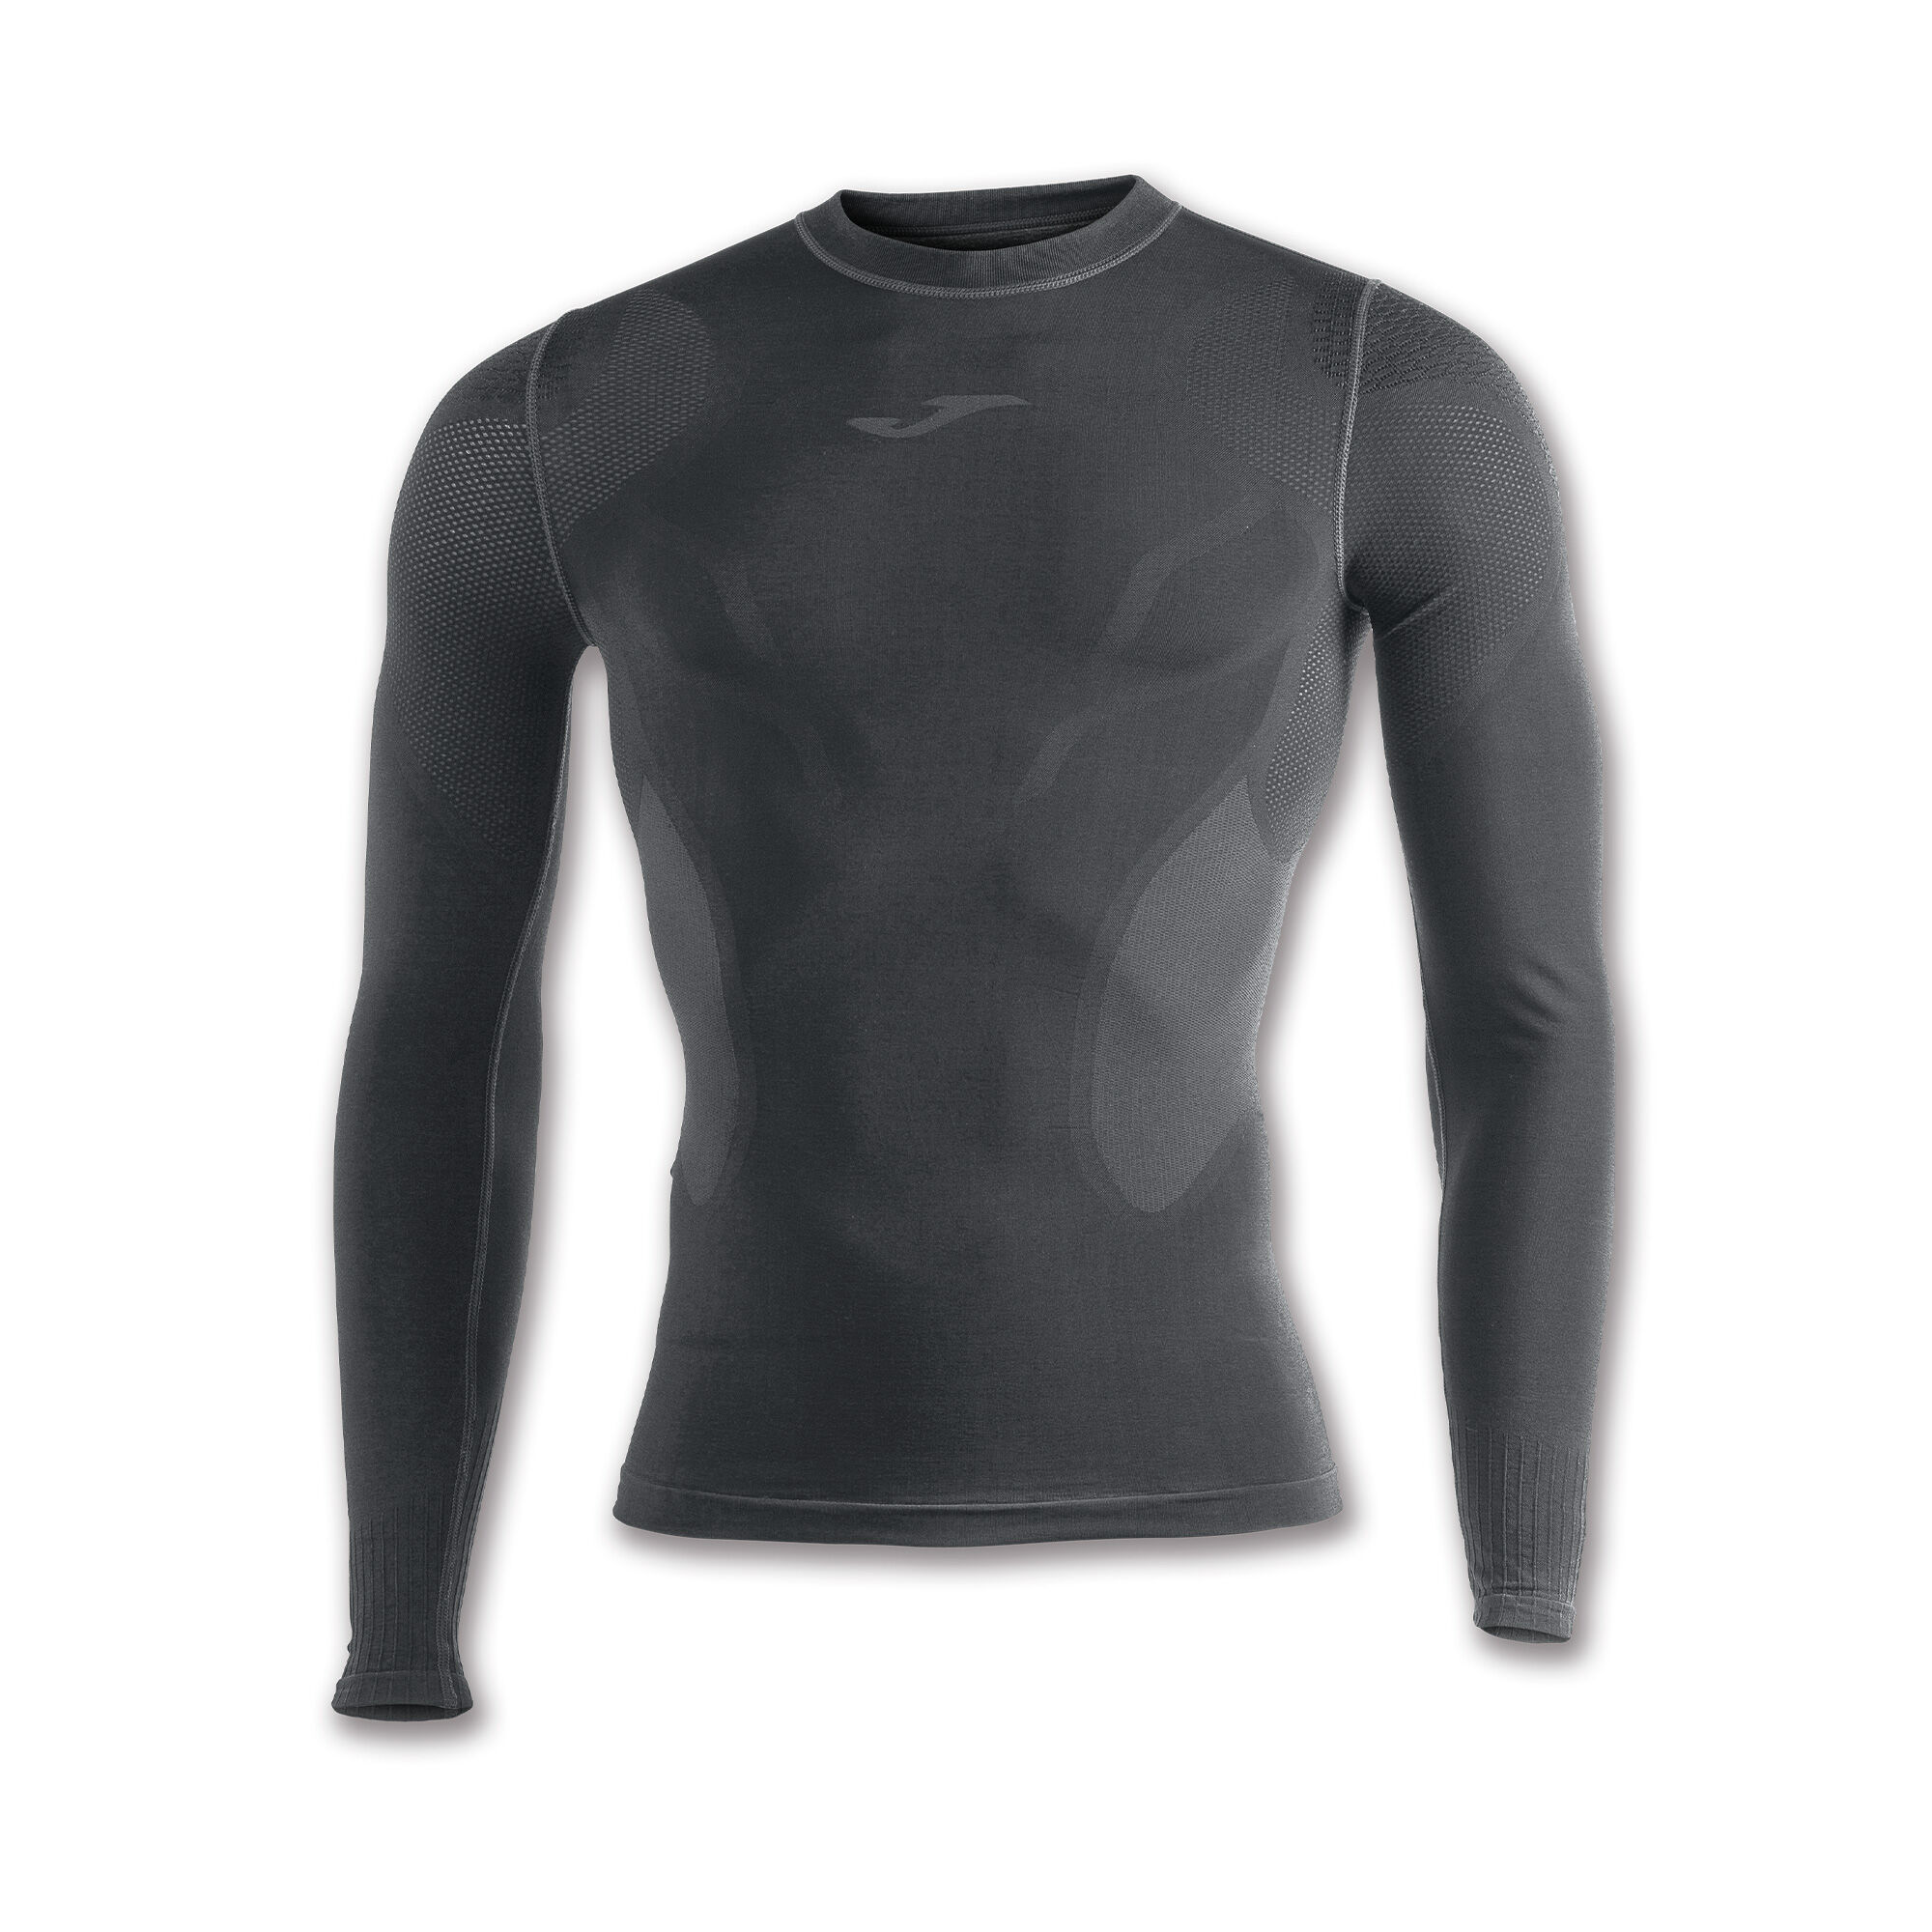 MAILLOT MANCHES LONGUES HOMME BRAMA EMOTION II ANTHRACITE